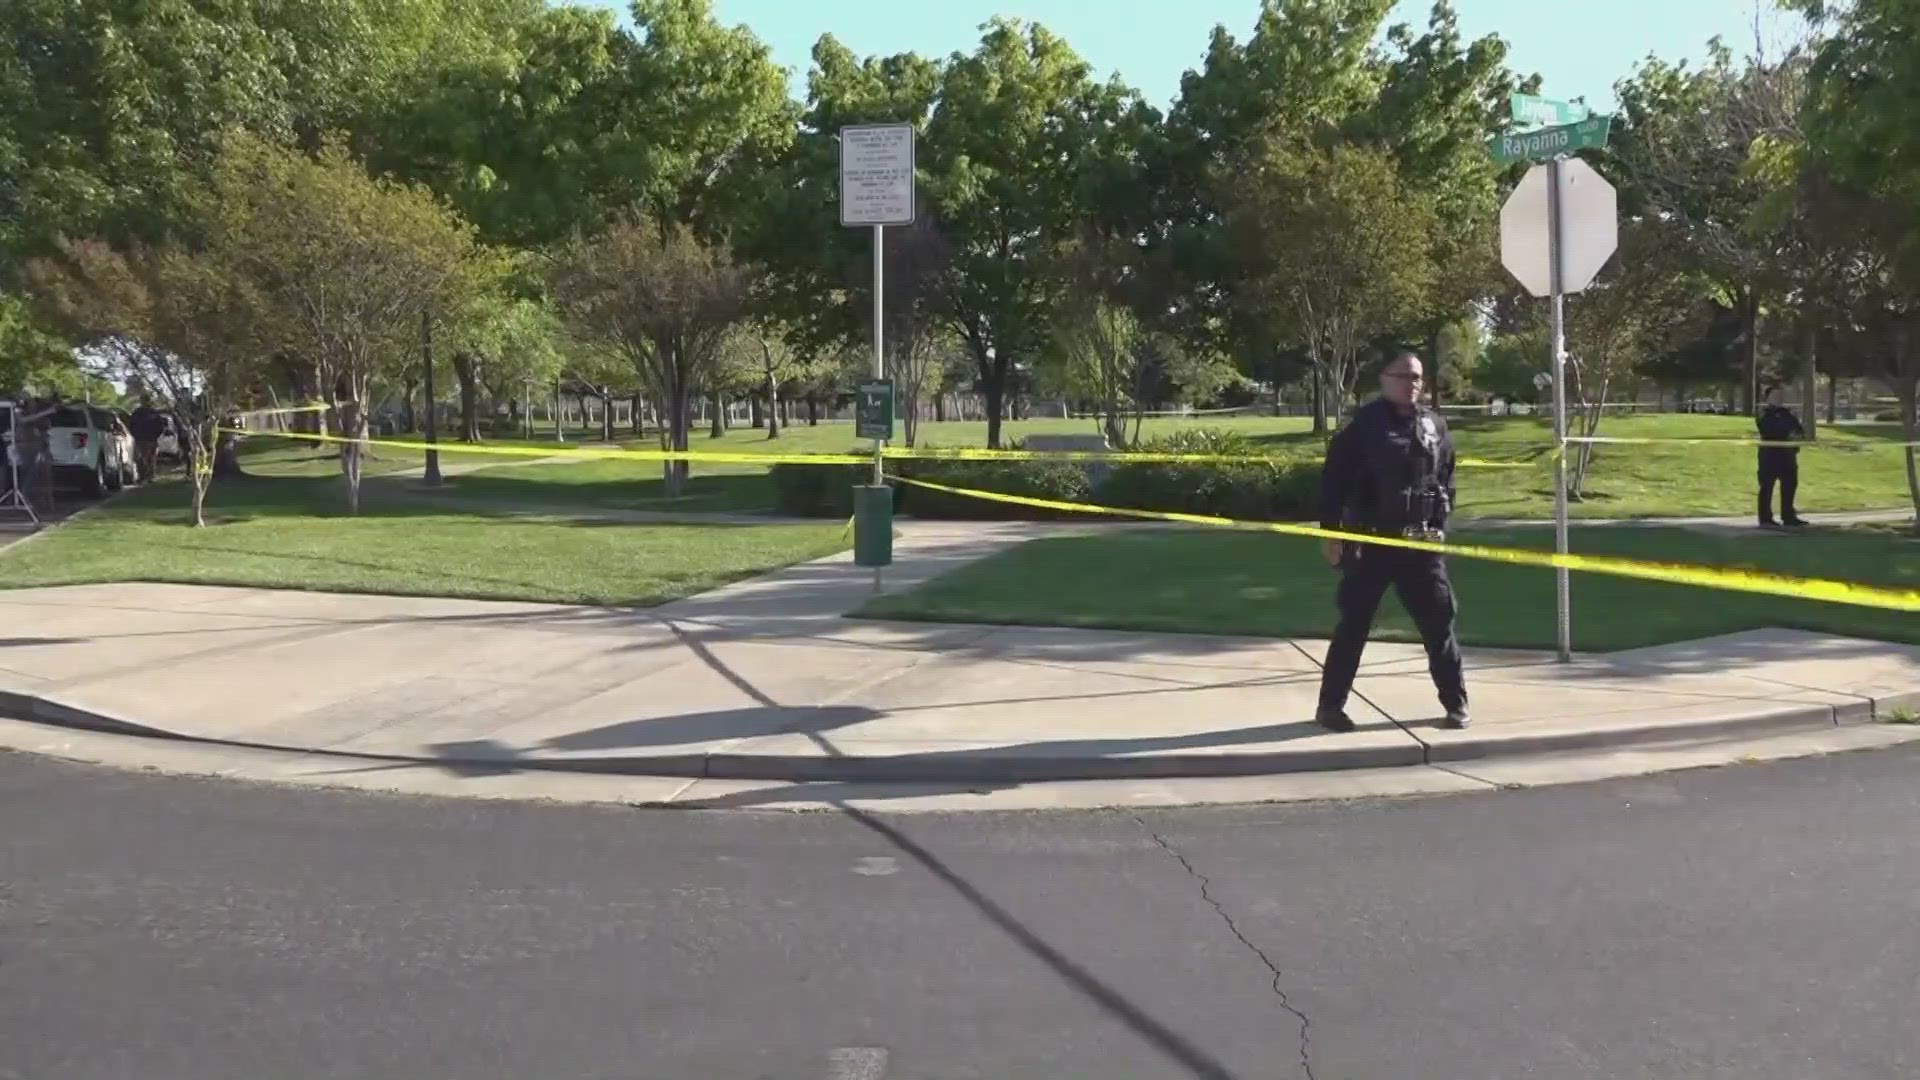 The shooting comes months after a student was hurt in a stabbing at the same park.